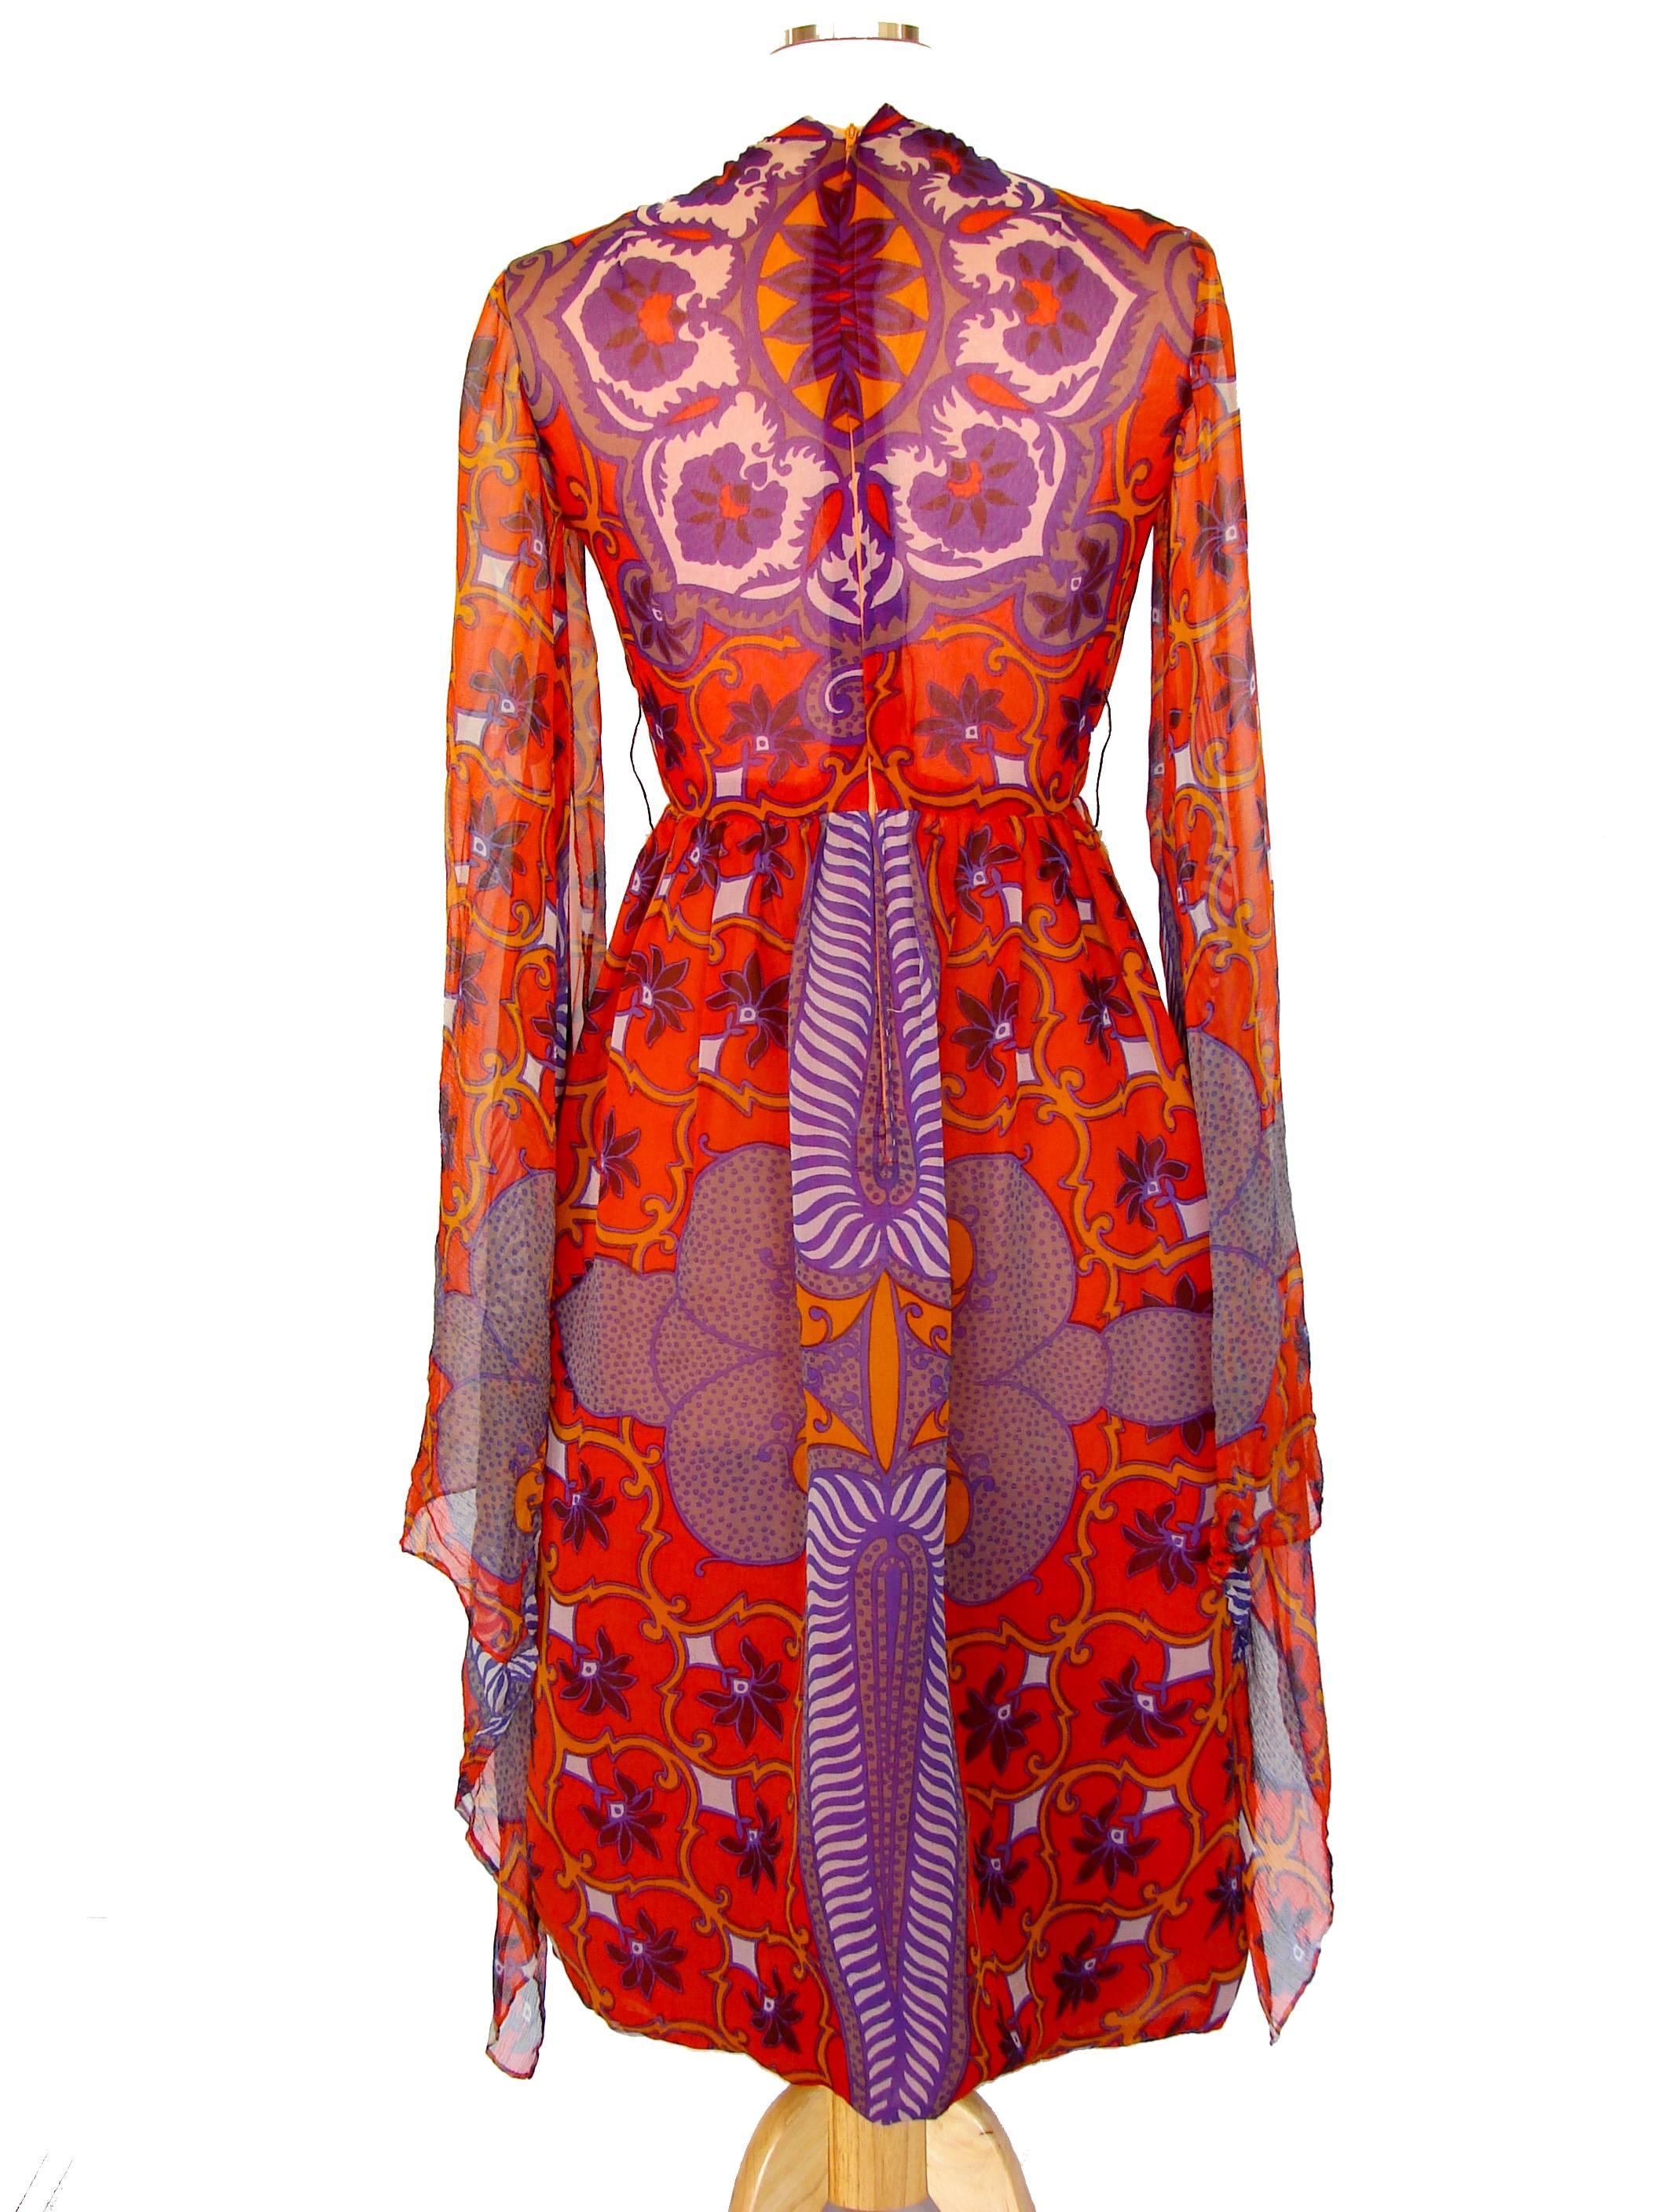 Orange Bill Blass Ethereal Floral Chiffon Dress with Sweeping Angel Sleeves Sz 10 1970s